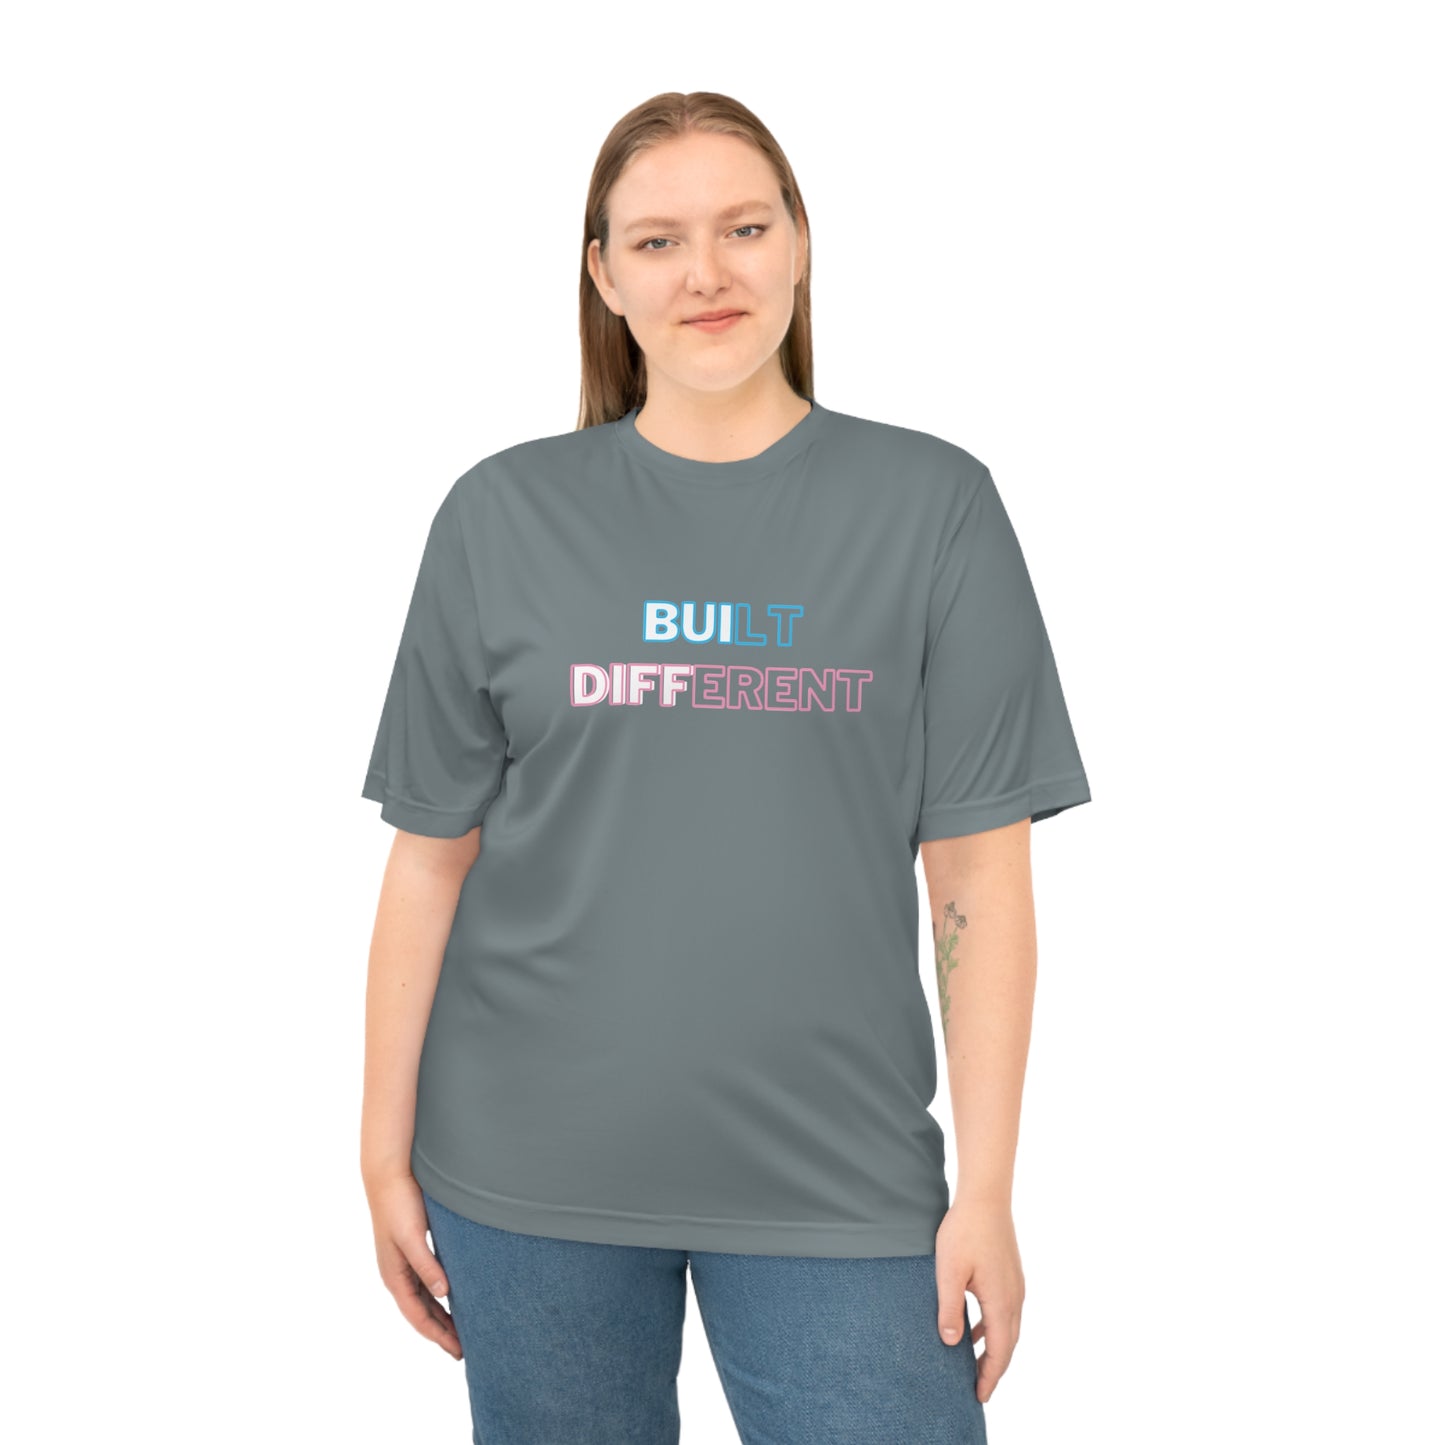 Built Different, Inspired by Jase & Pierce- Unisex Zone Performance T-shirt